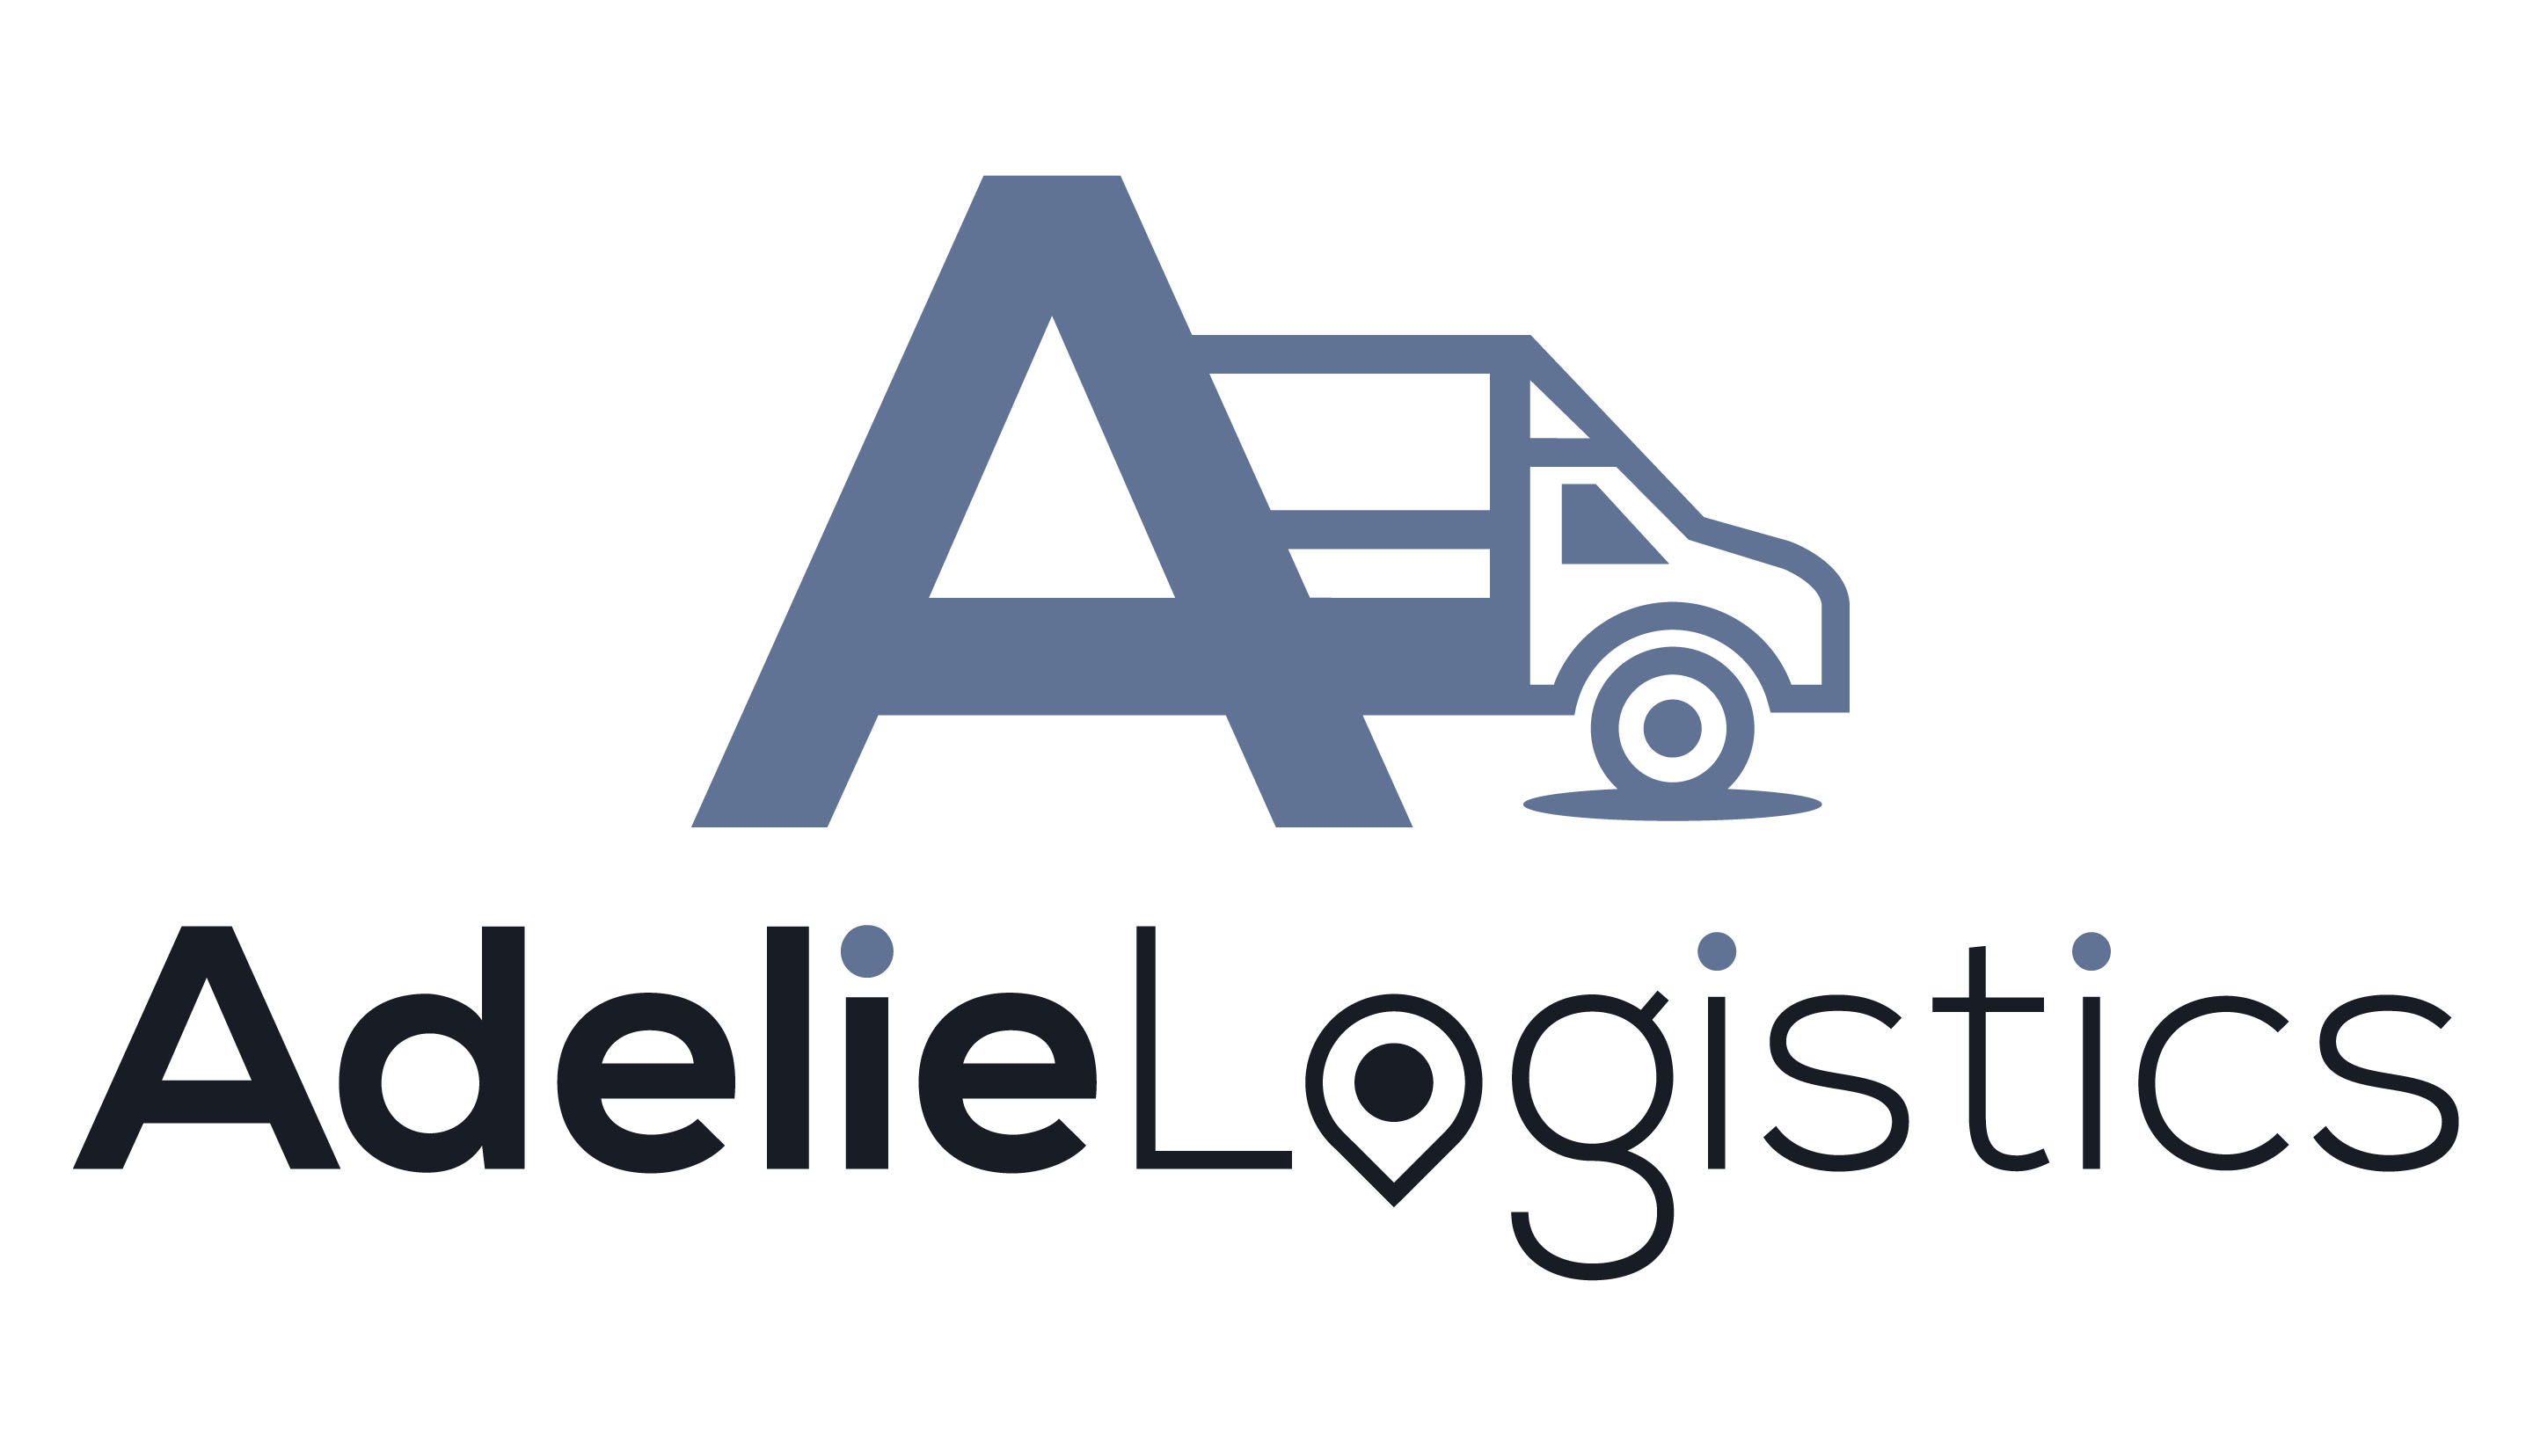 Adelie Logistics Equipment and Event Rental Software to Release E-Commerce Integrations for Both WooCommerce and Shopify